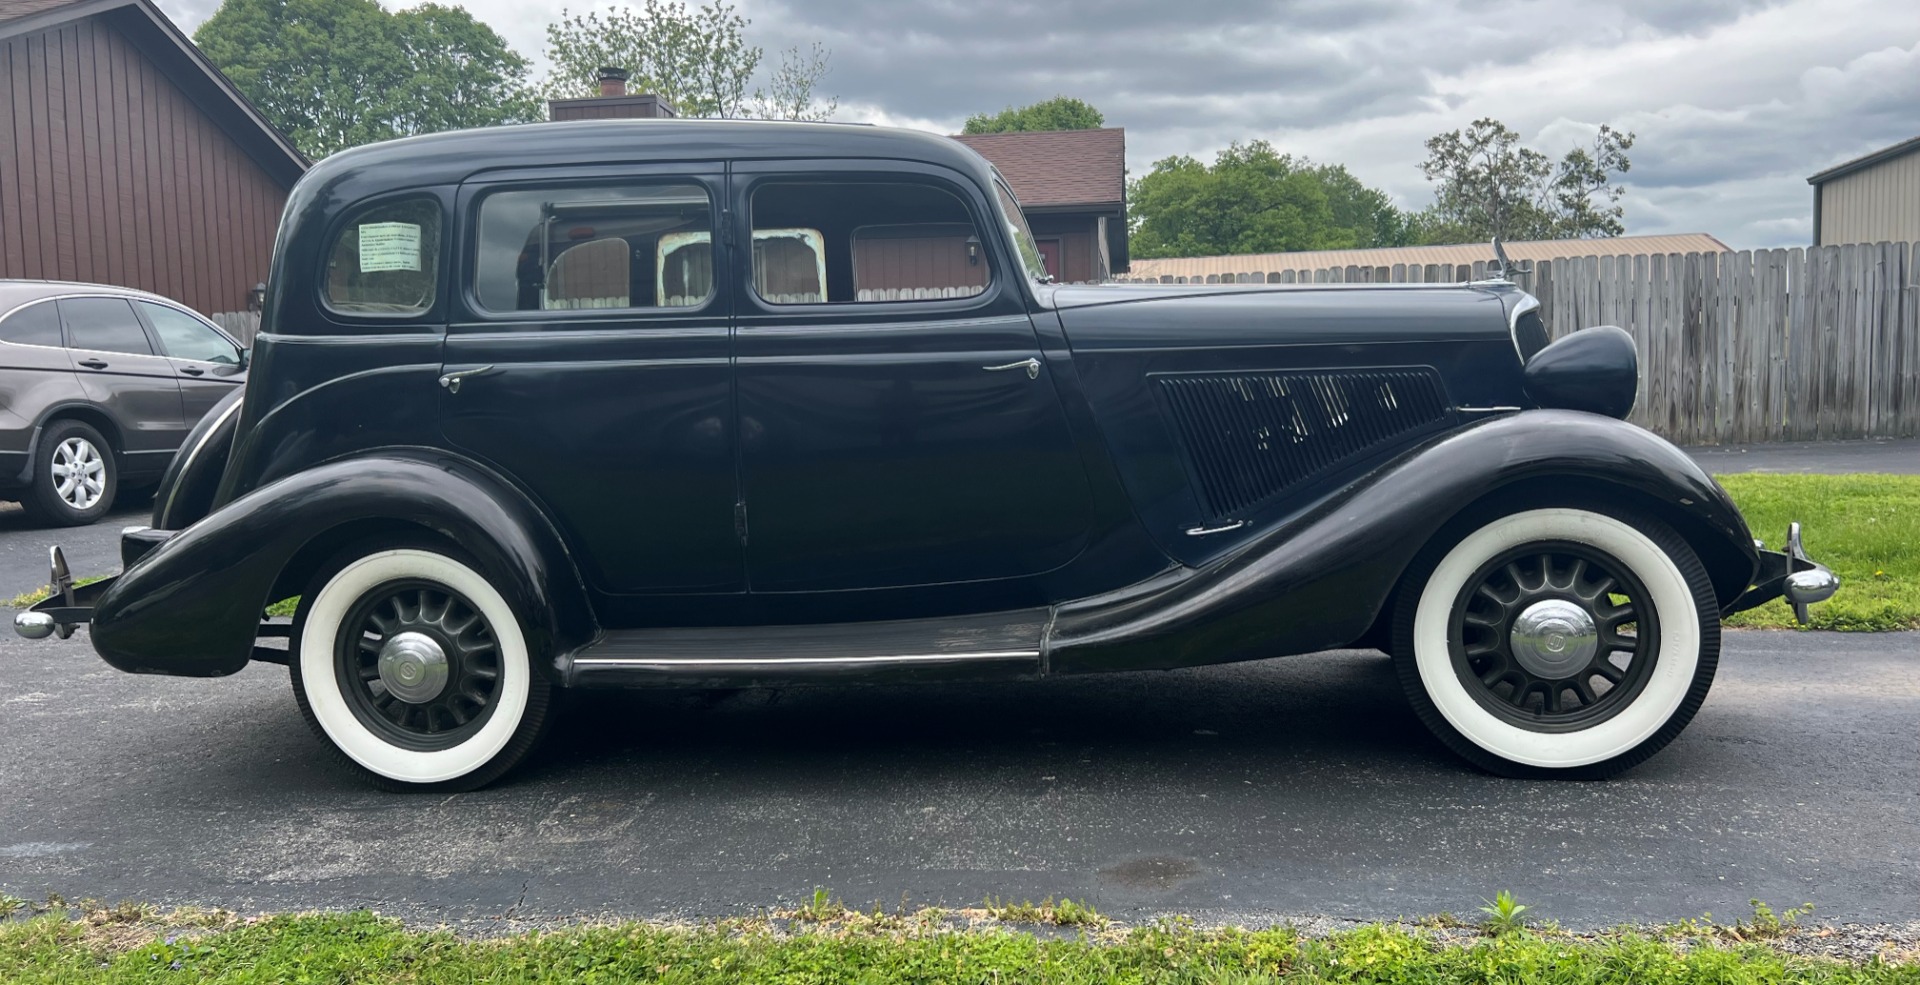 Used 1934 Studebaker Deluxe Dictator 6  241 , For Sale $32000, Call Us: (704) 996-3735